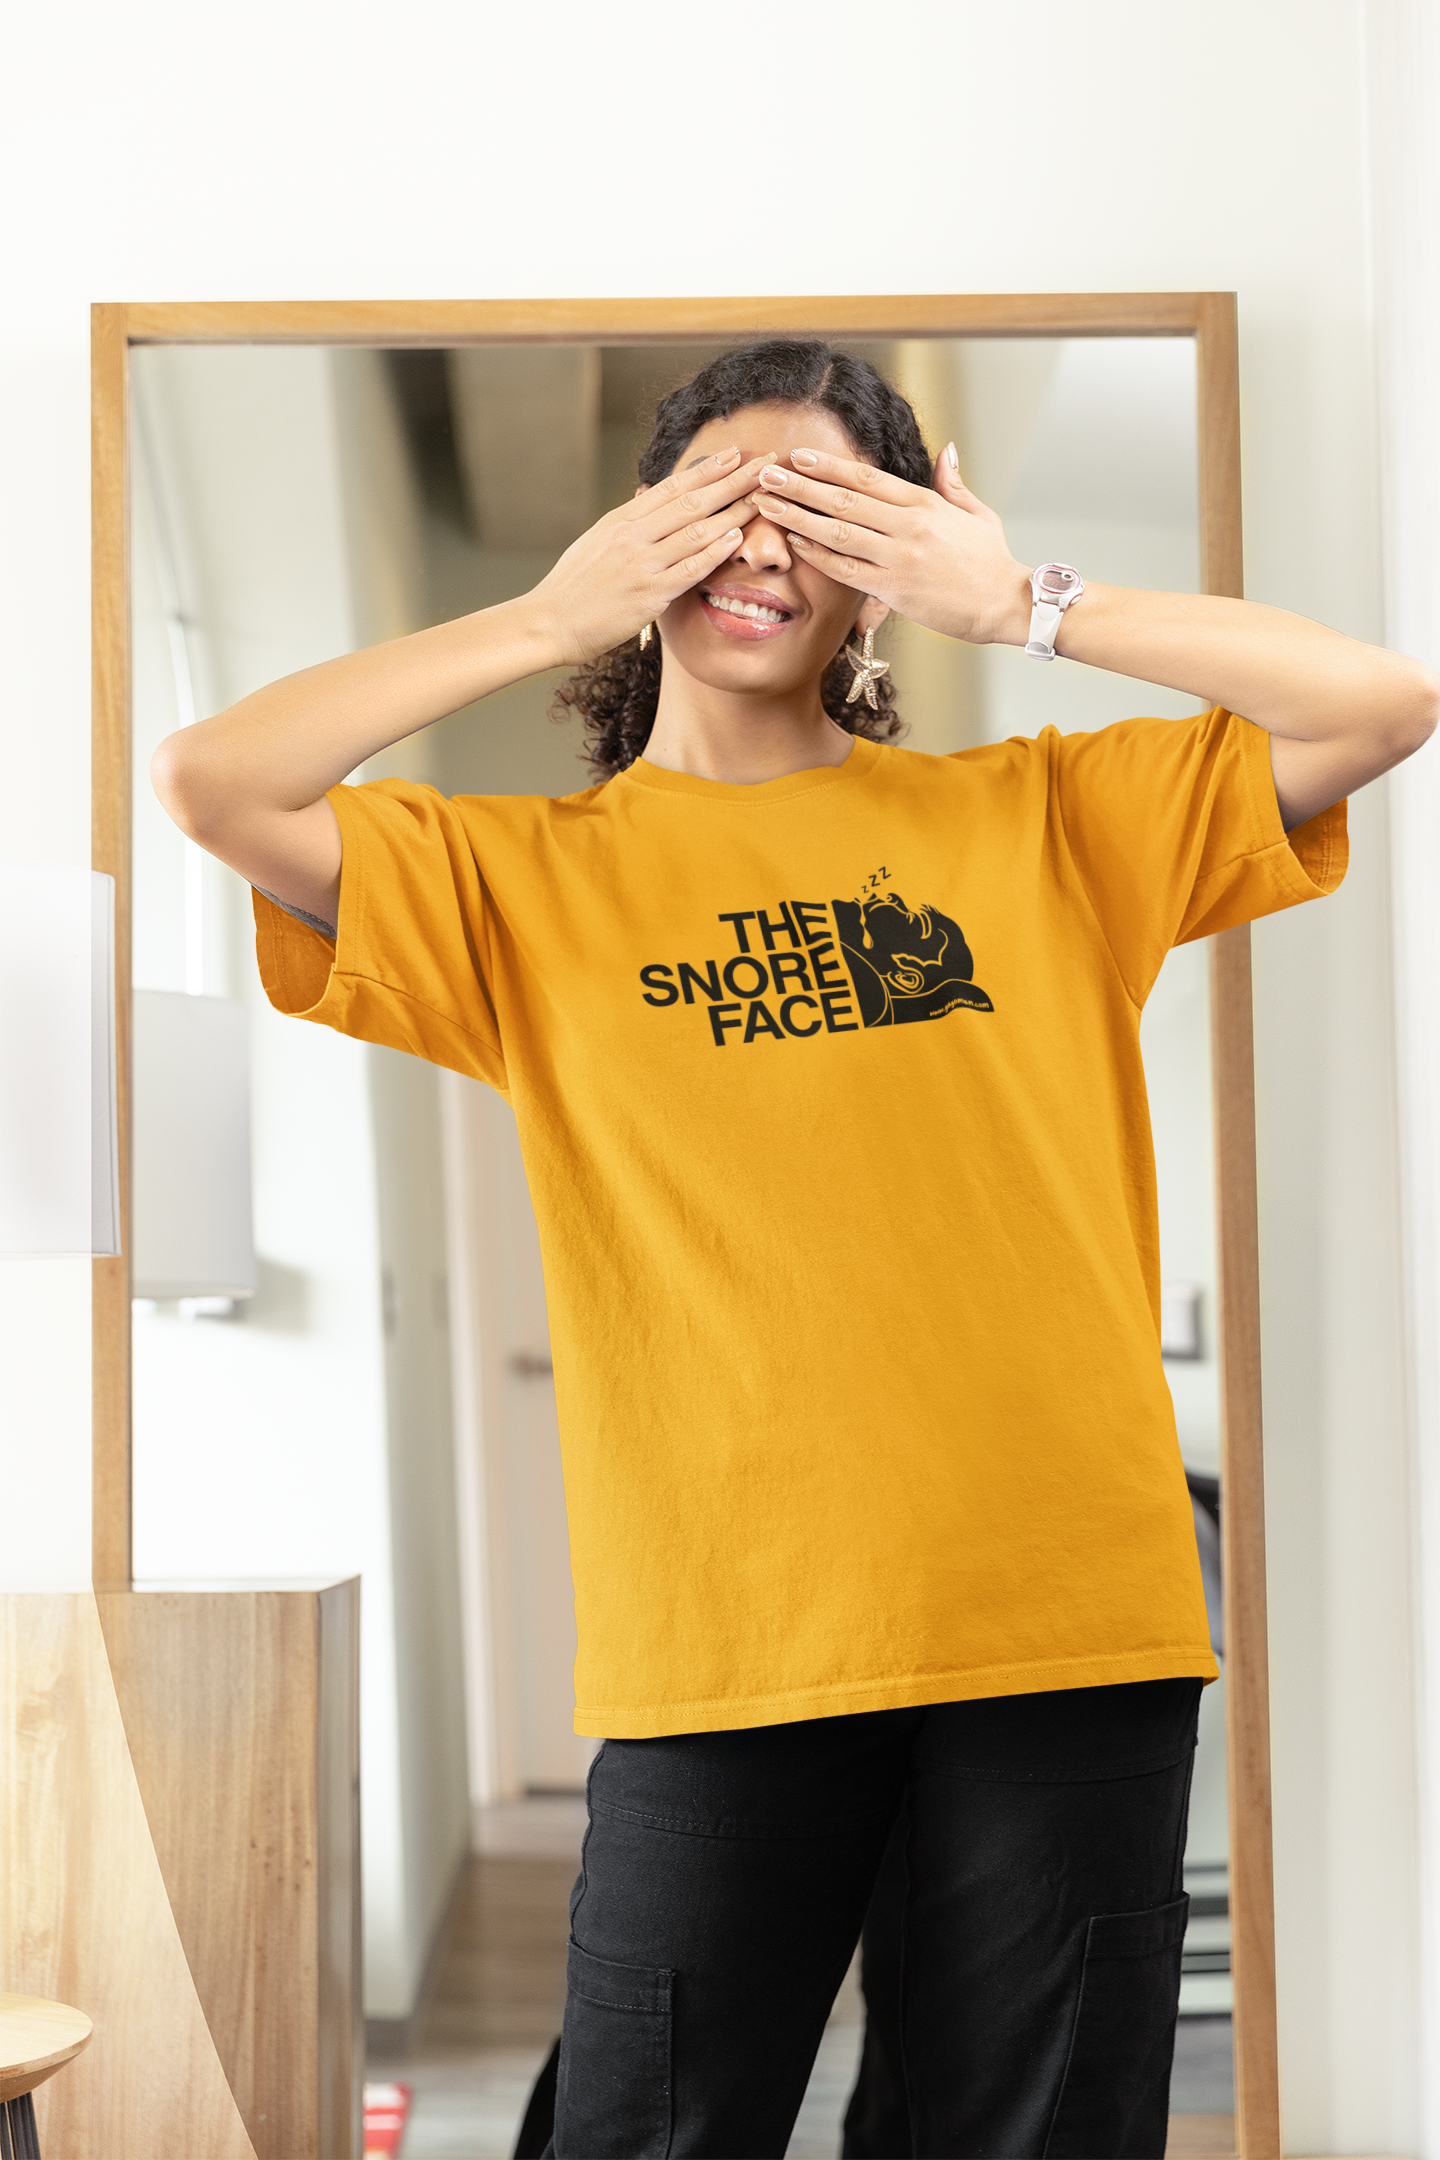 funny the north face t shirt, brand parody t shirt, funny t-shirts, parody t-shirts, funny outdoor t-shirt, funny hiking t-shirt, funny camping t-shirt